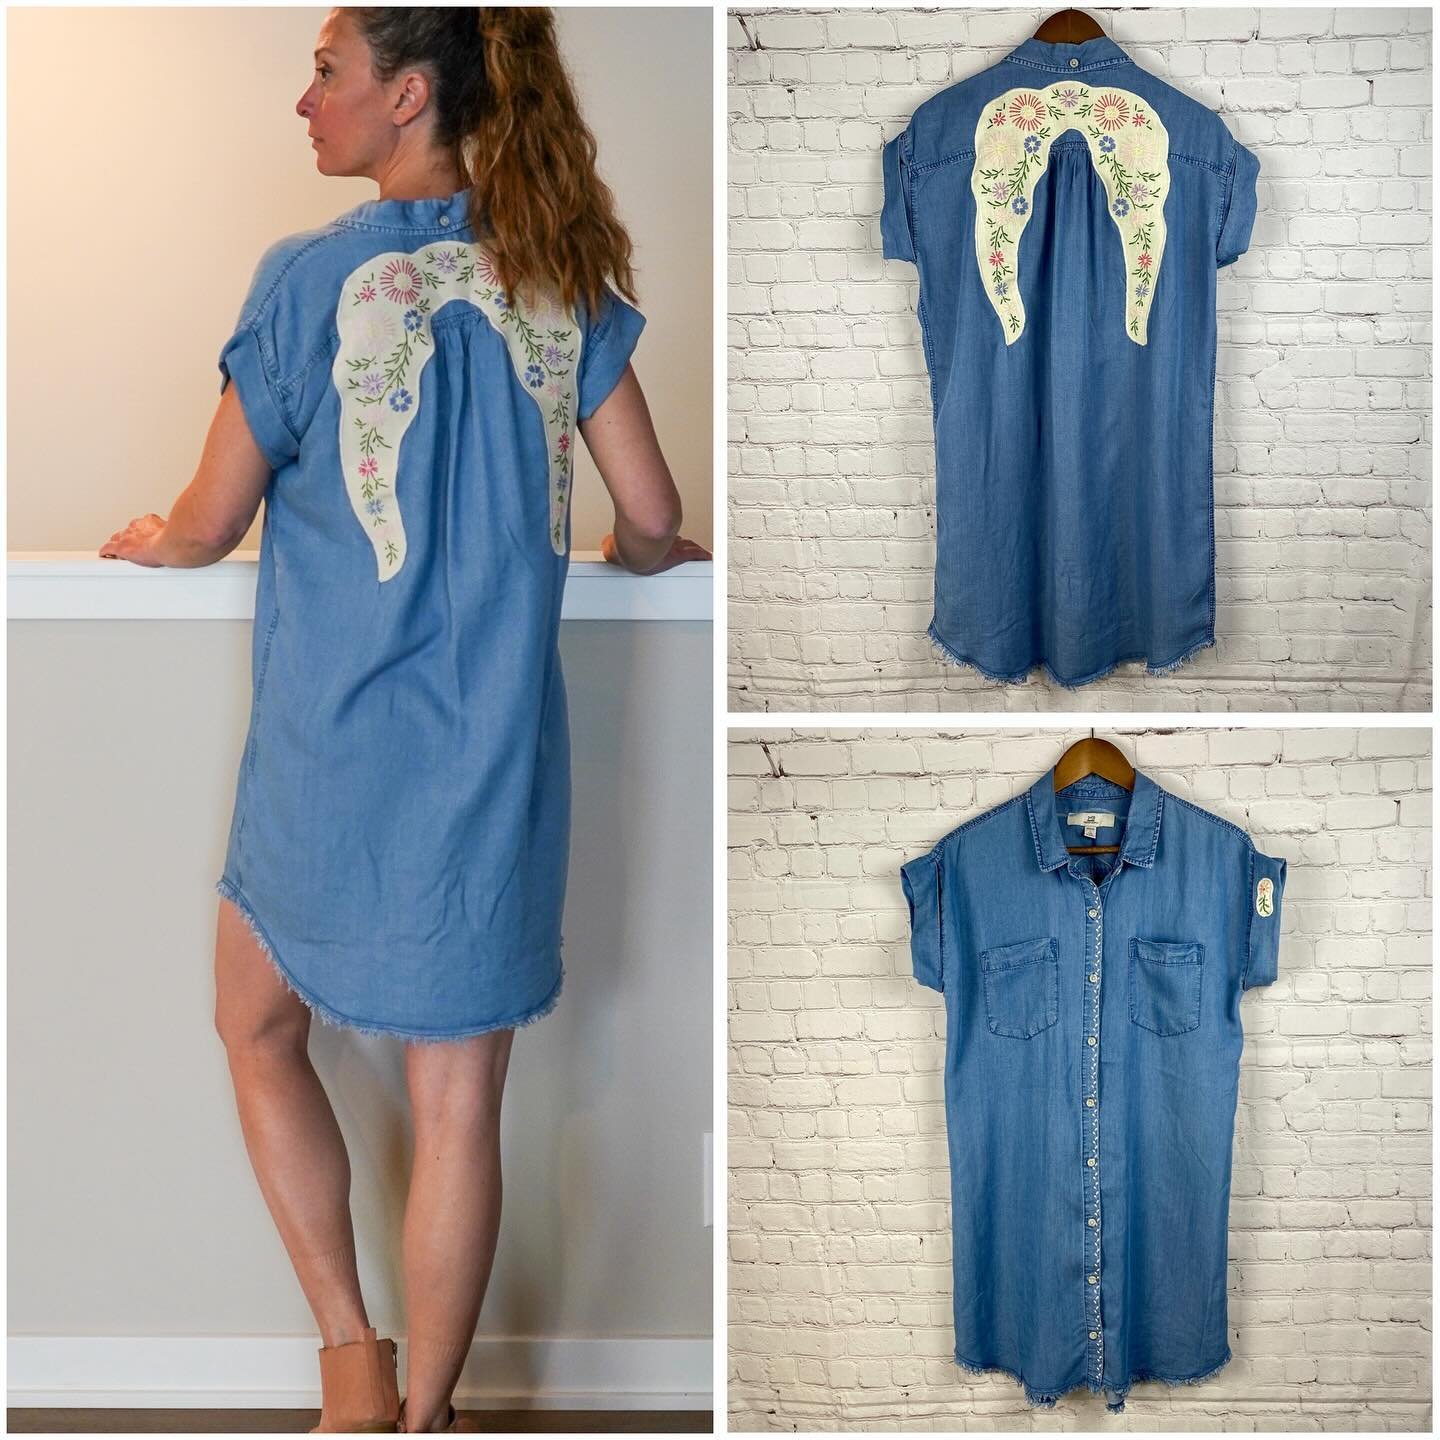 &bull;&bull;&bull;100% upcycled / recycled fashion &bull;&bull;&bull;
Denim tunic with embroidered vintage linen embellishment. 
I love turning something old into something new. A vintage table runner was too pretty not to wear. And we&rsquo;re alway